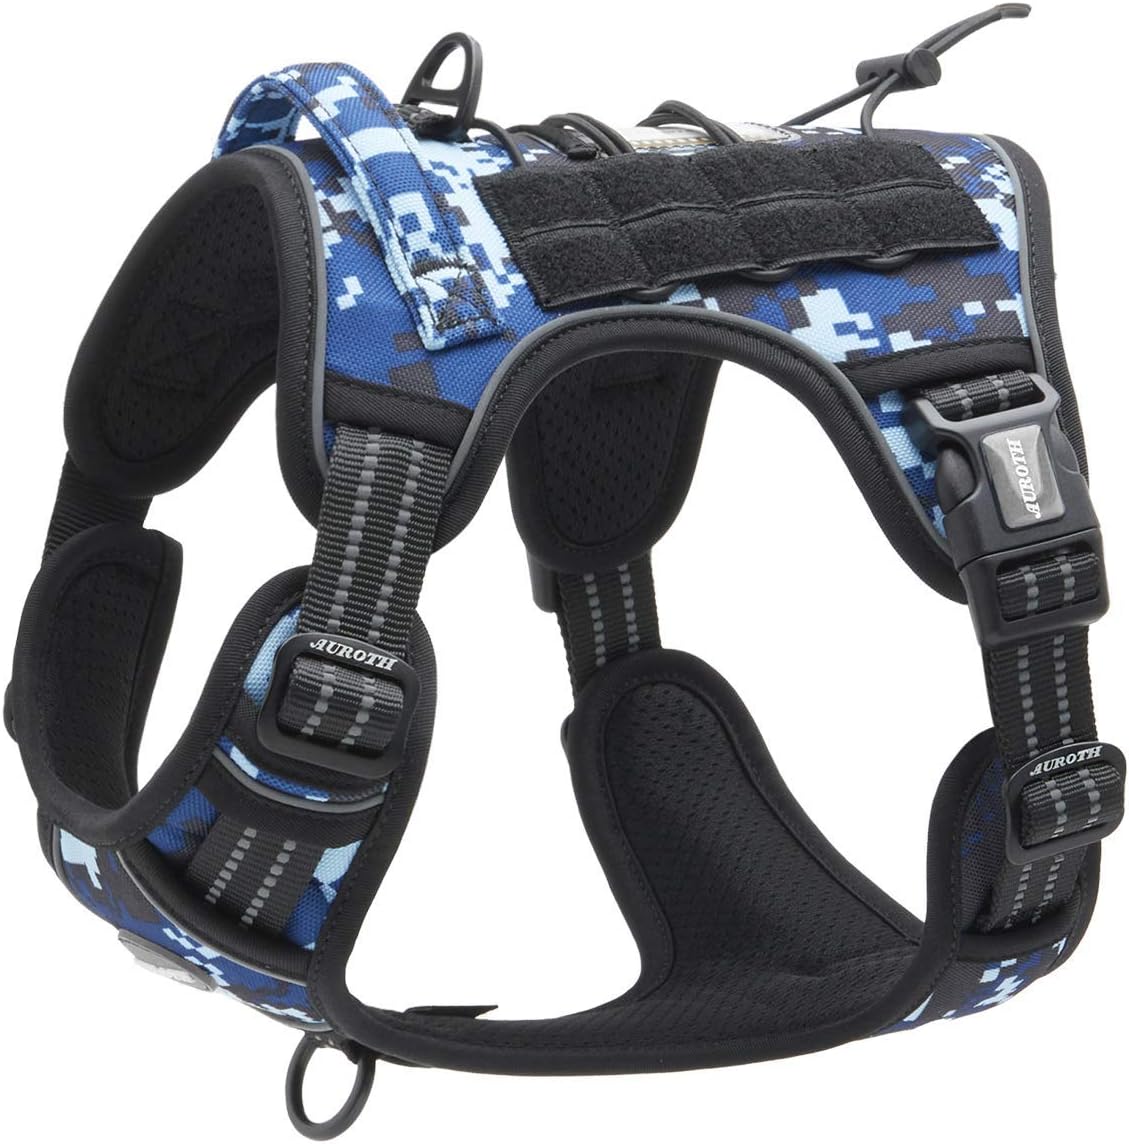 Auroth Tactical Dog Training Harness No Pulling Front Clip Leash Adhesion Reflective K9 Pet Working Vest Easy Control for Small Medium Large Dogs Blue Camo M